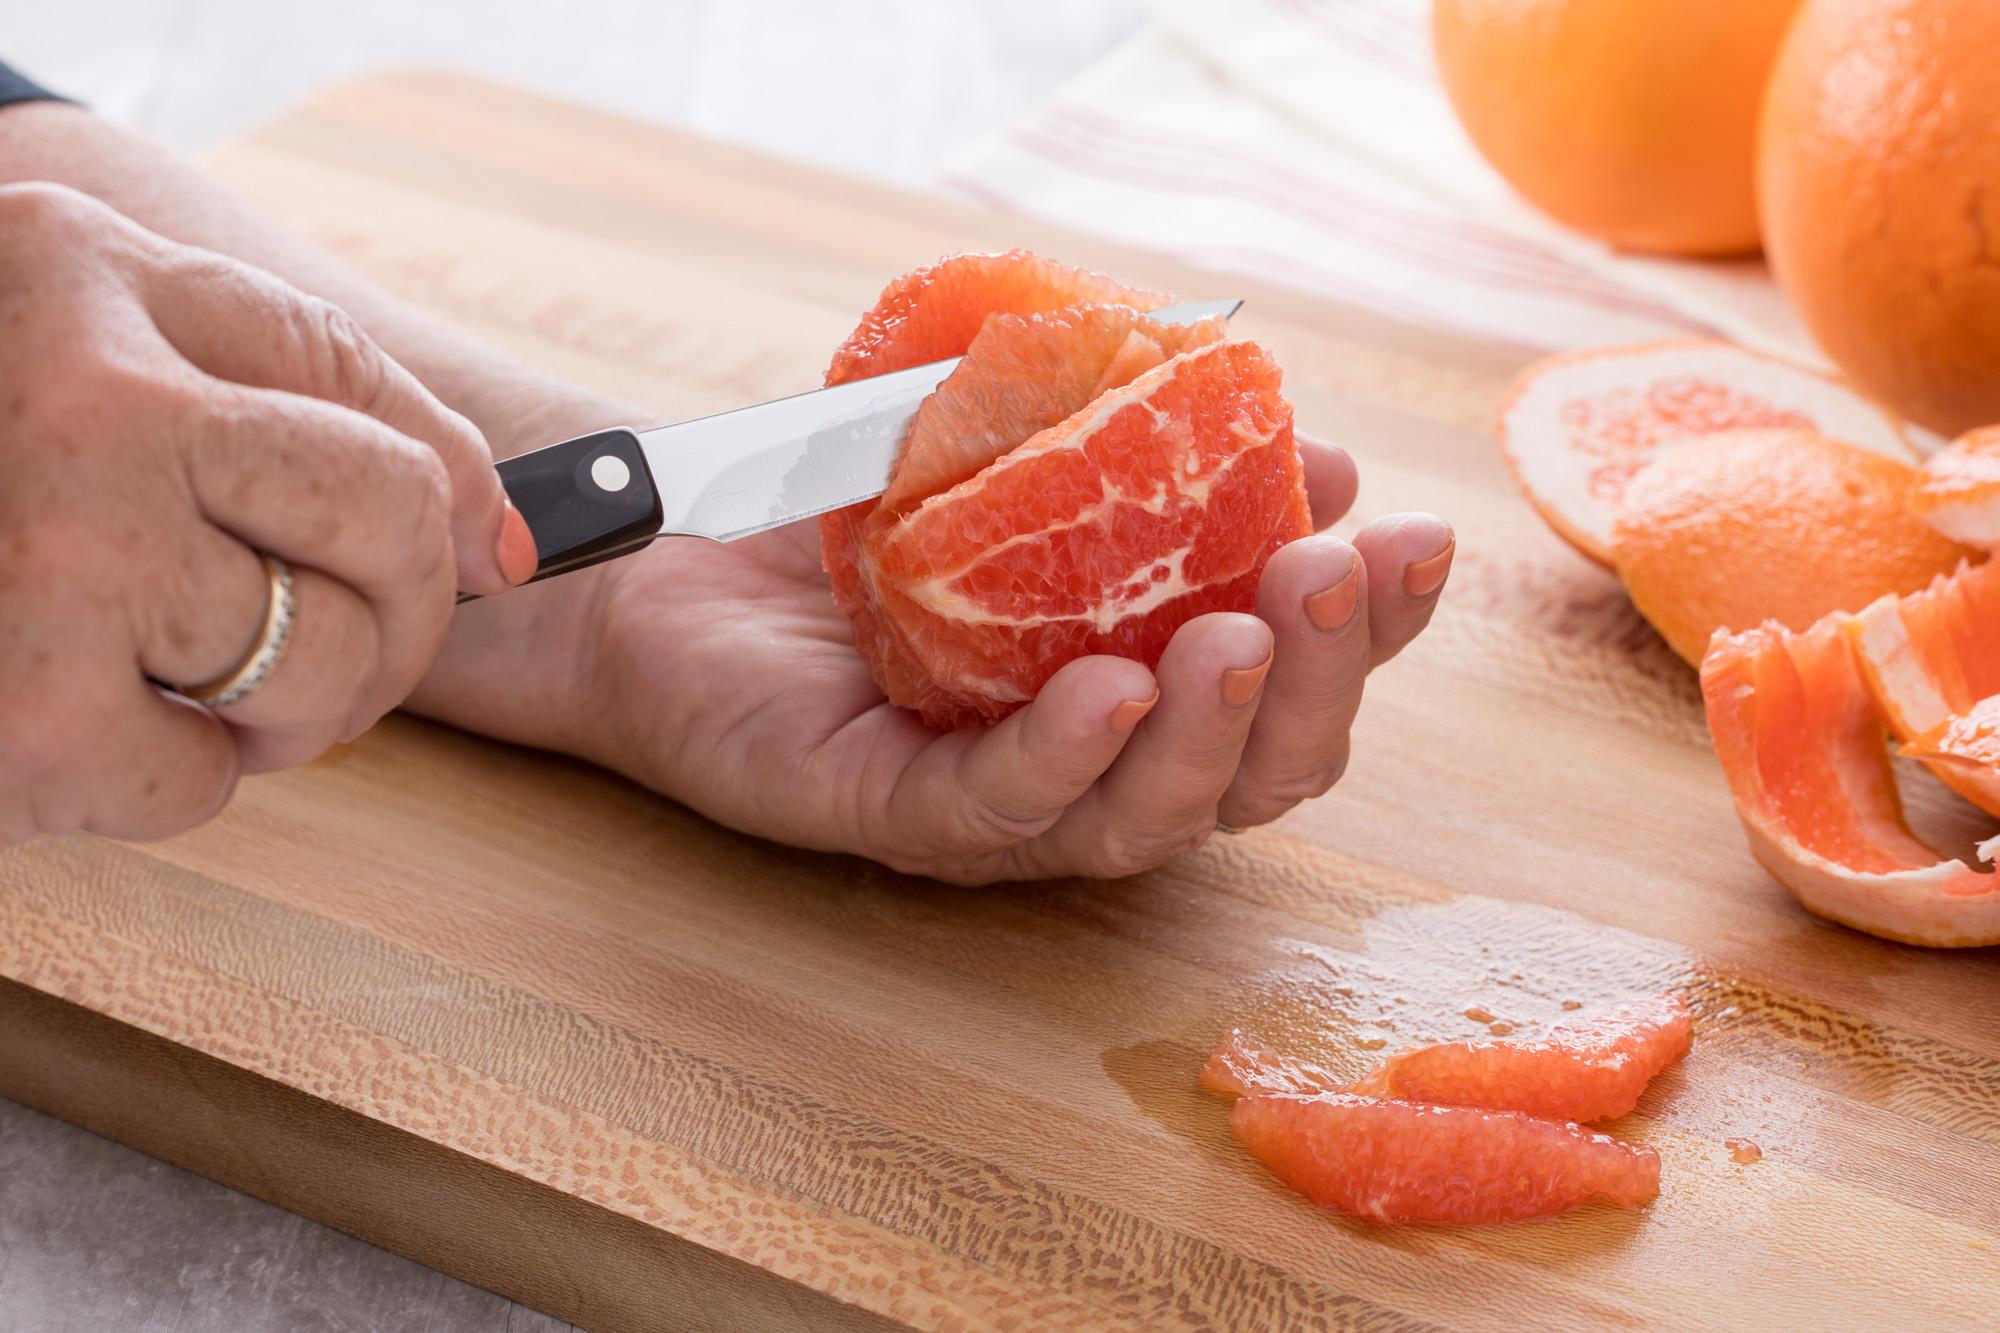 Slicing the grapefruit with a 4 Inch Gourmet Paring Knife.